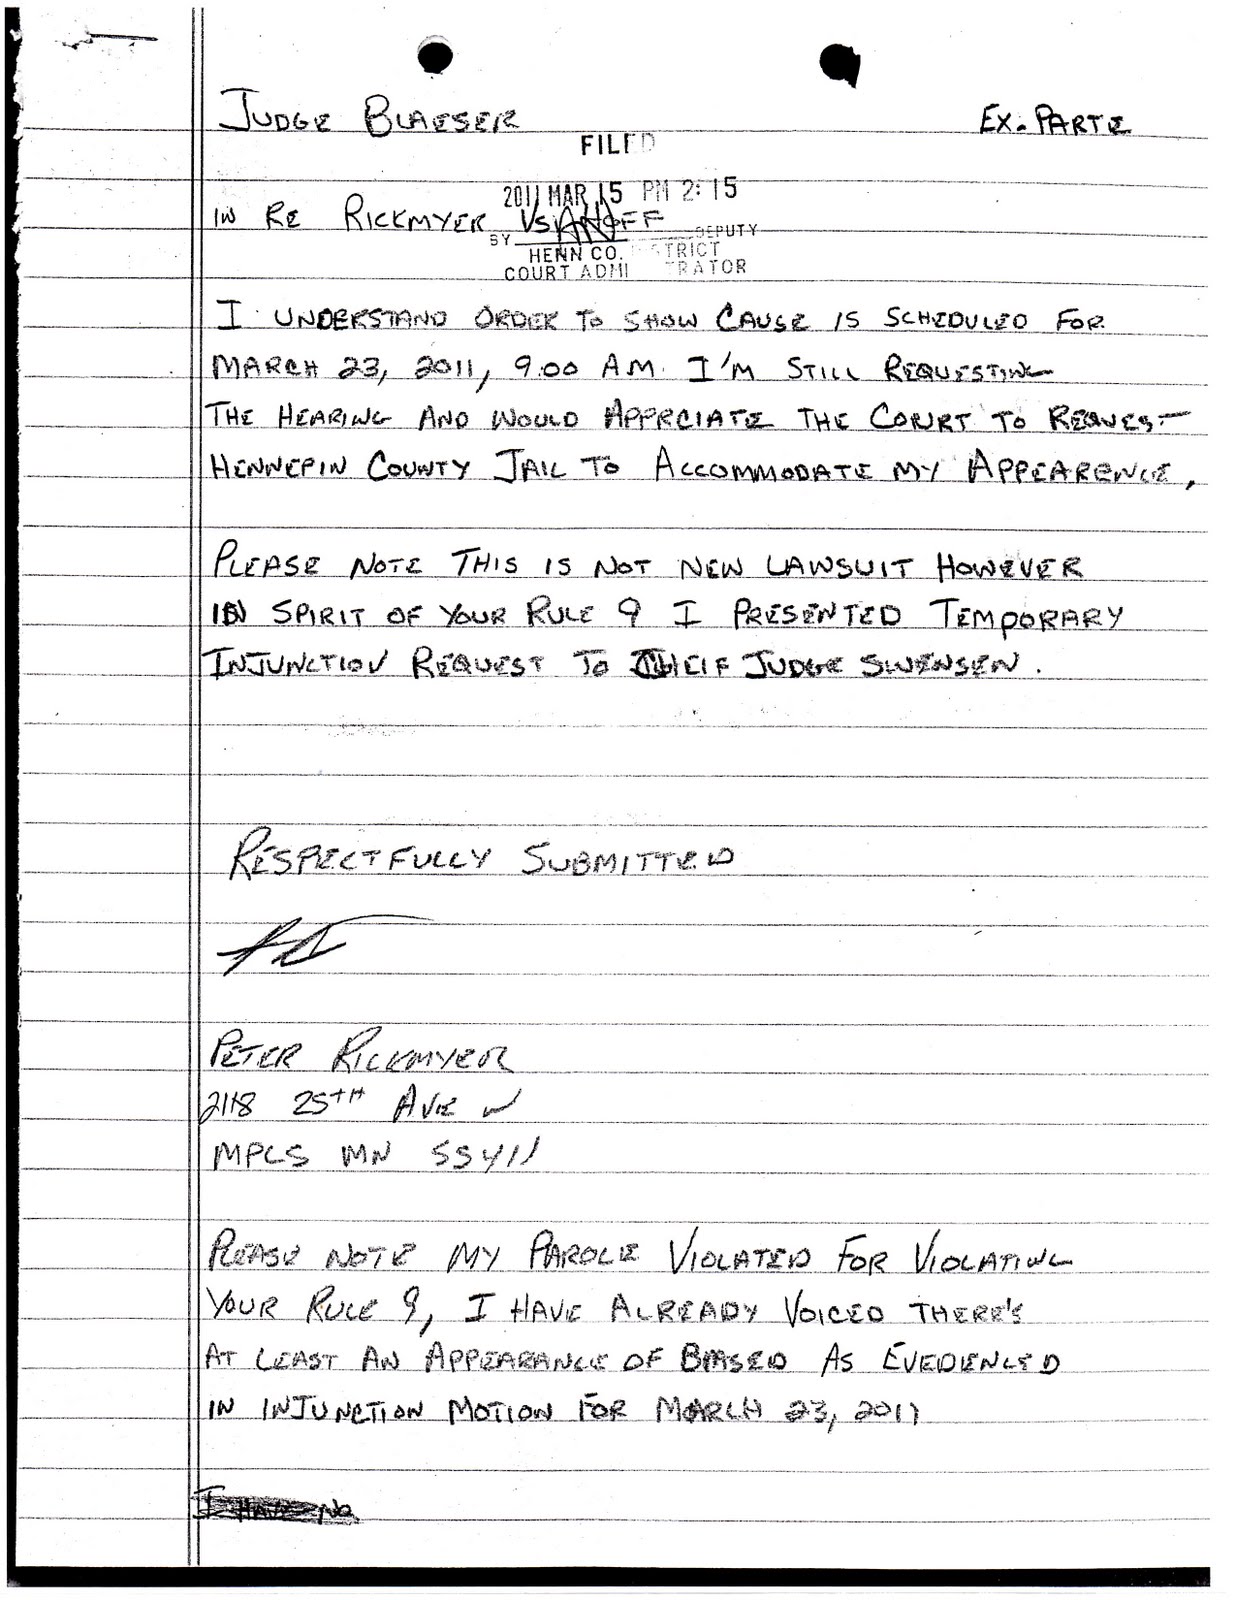 Early Release From Probation Sample Letter from 4.bp.blogspot.com